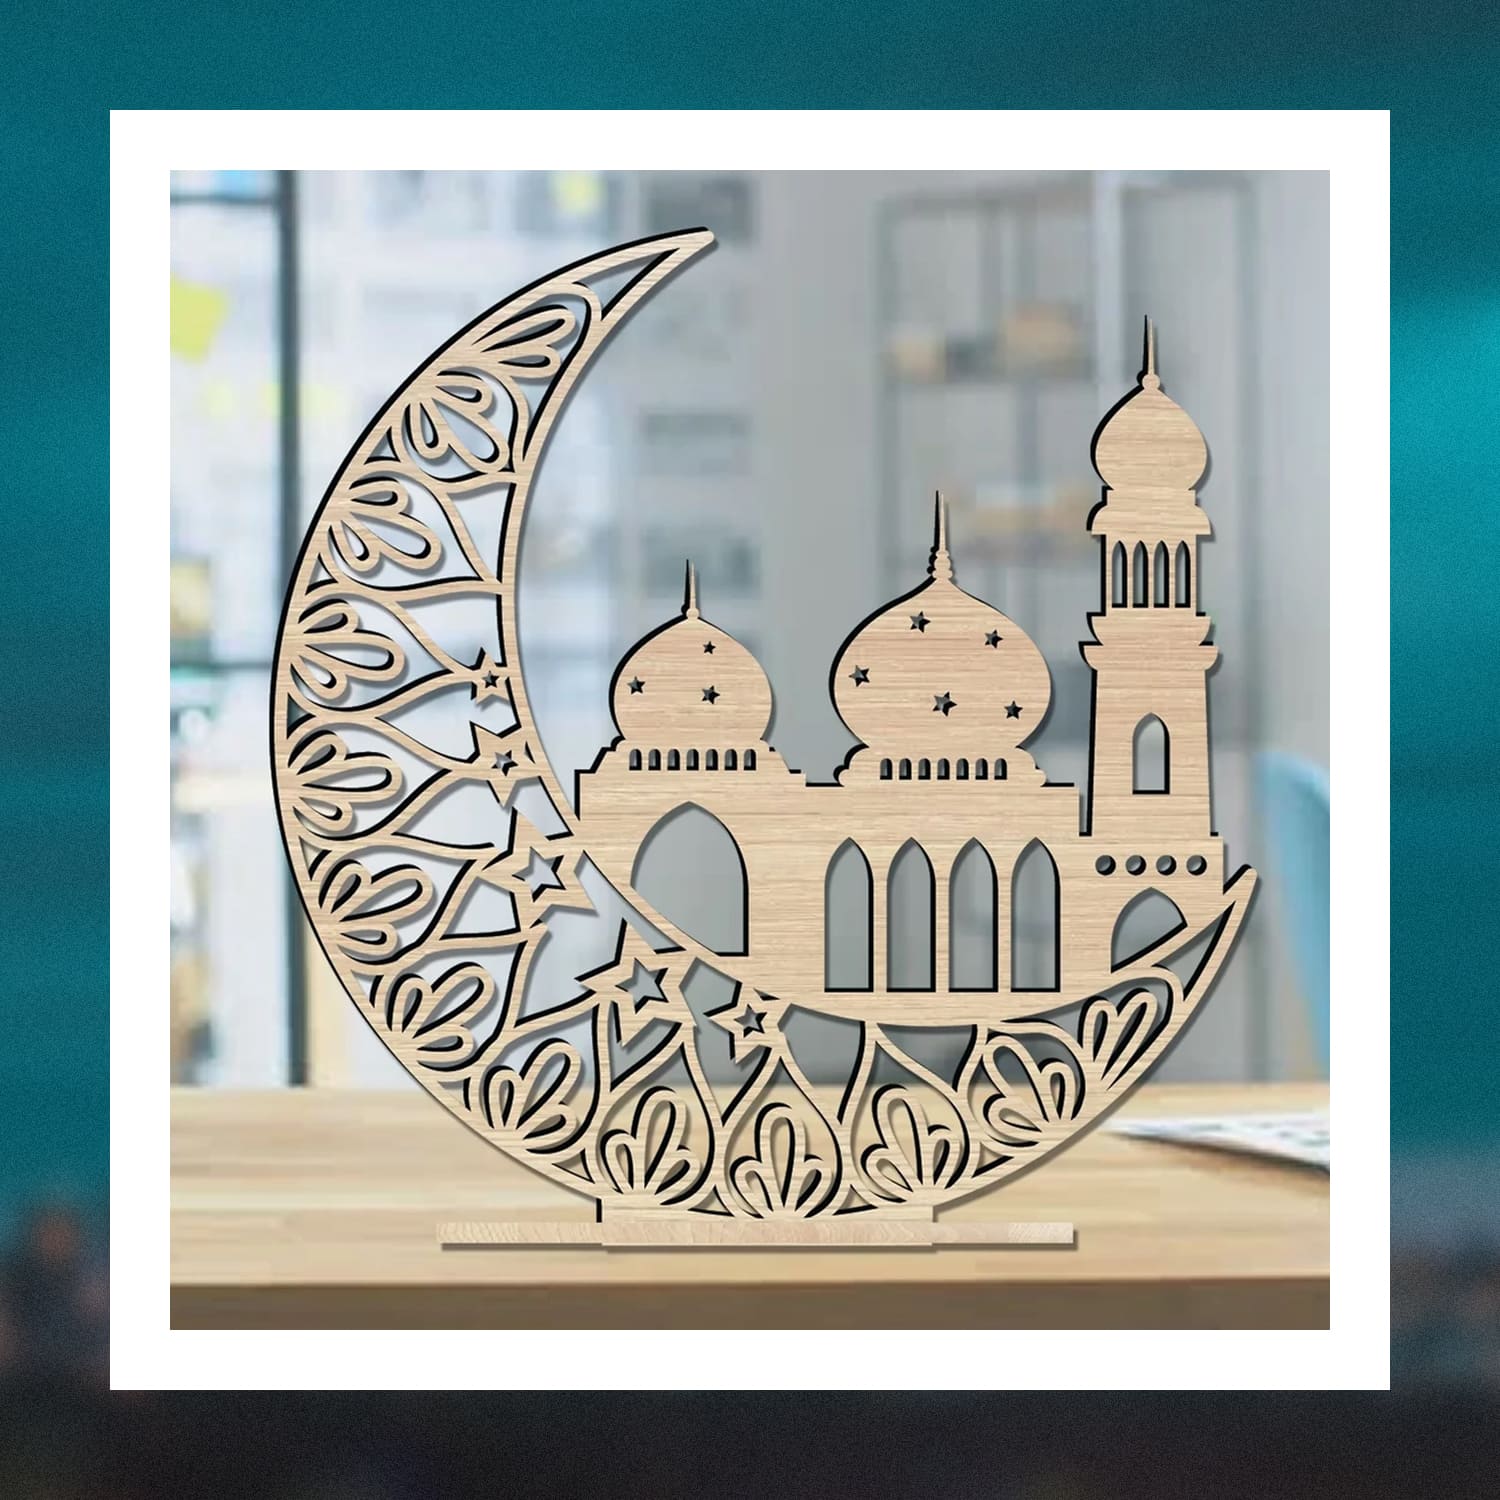 crescent moon table top decor products.